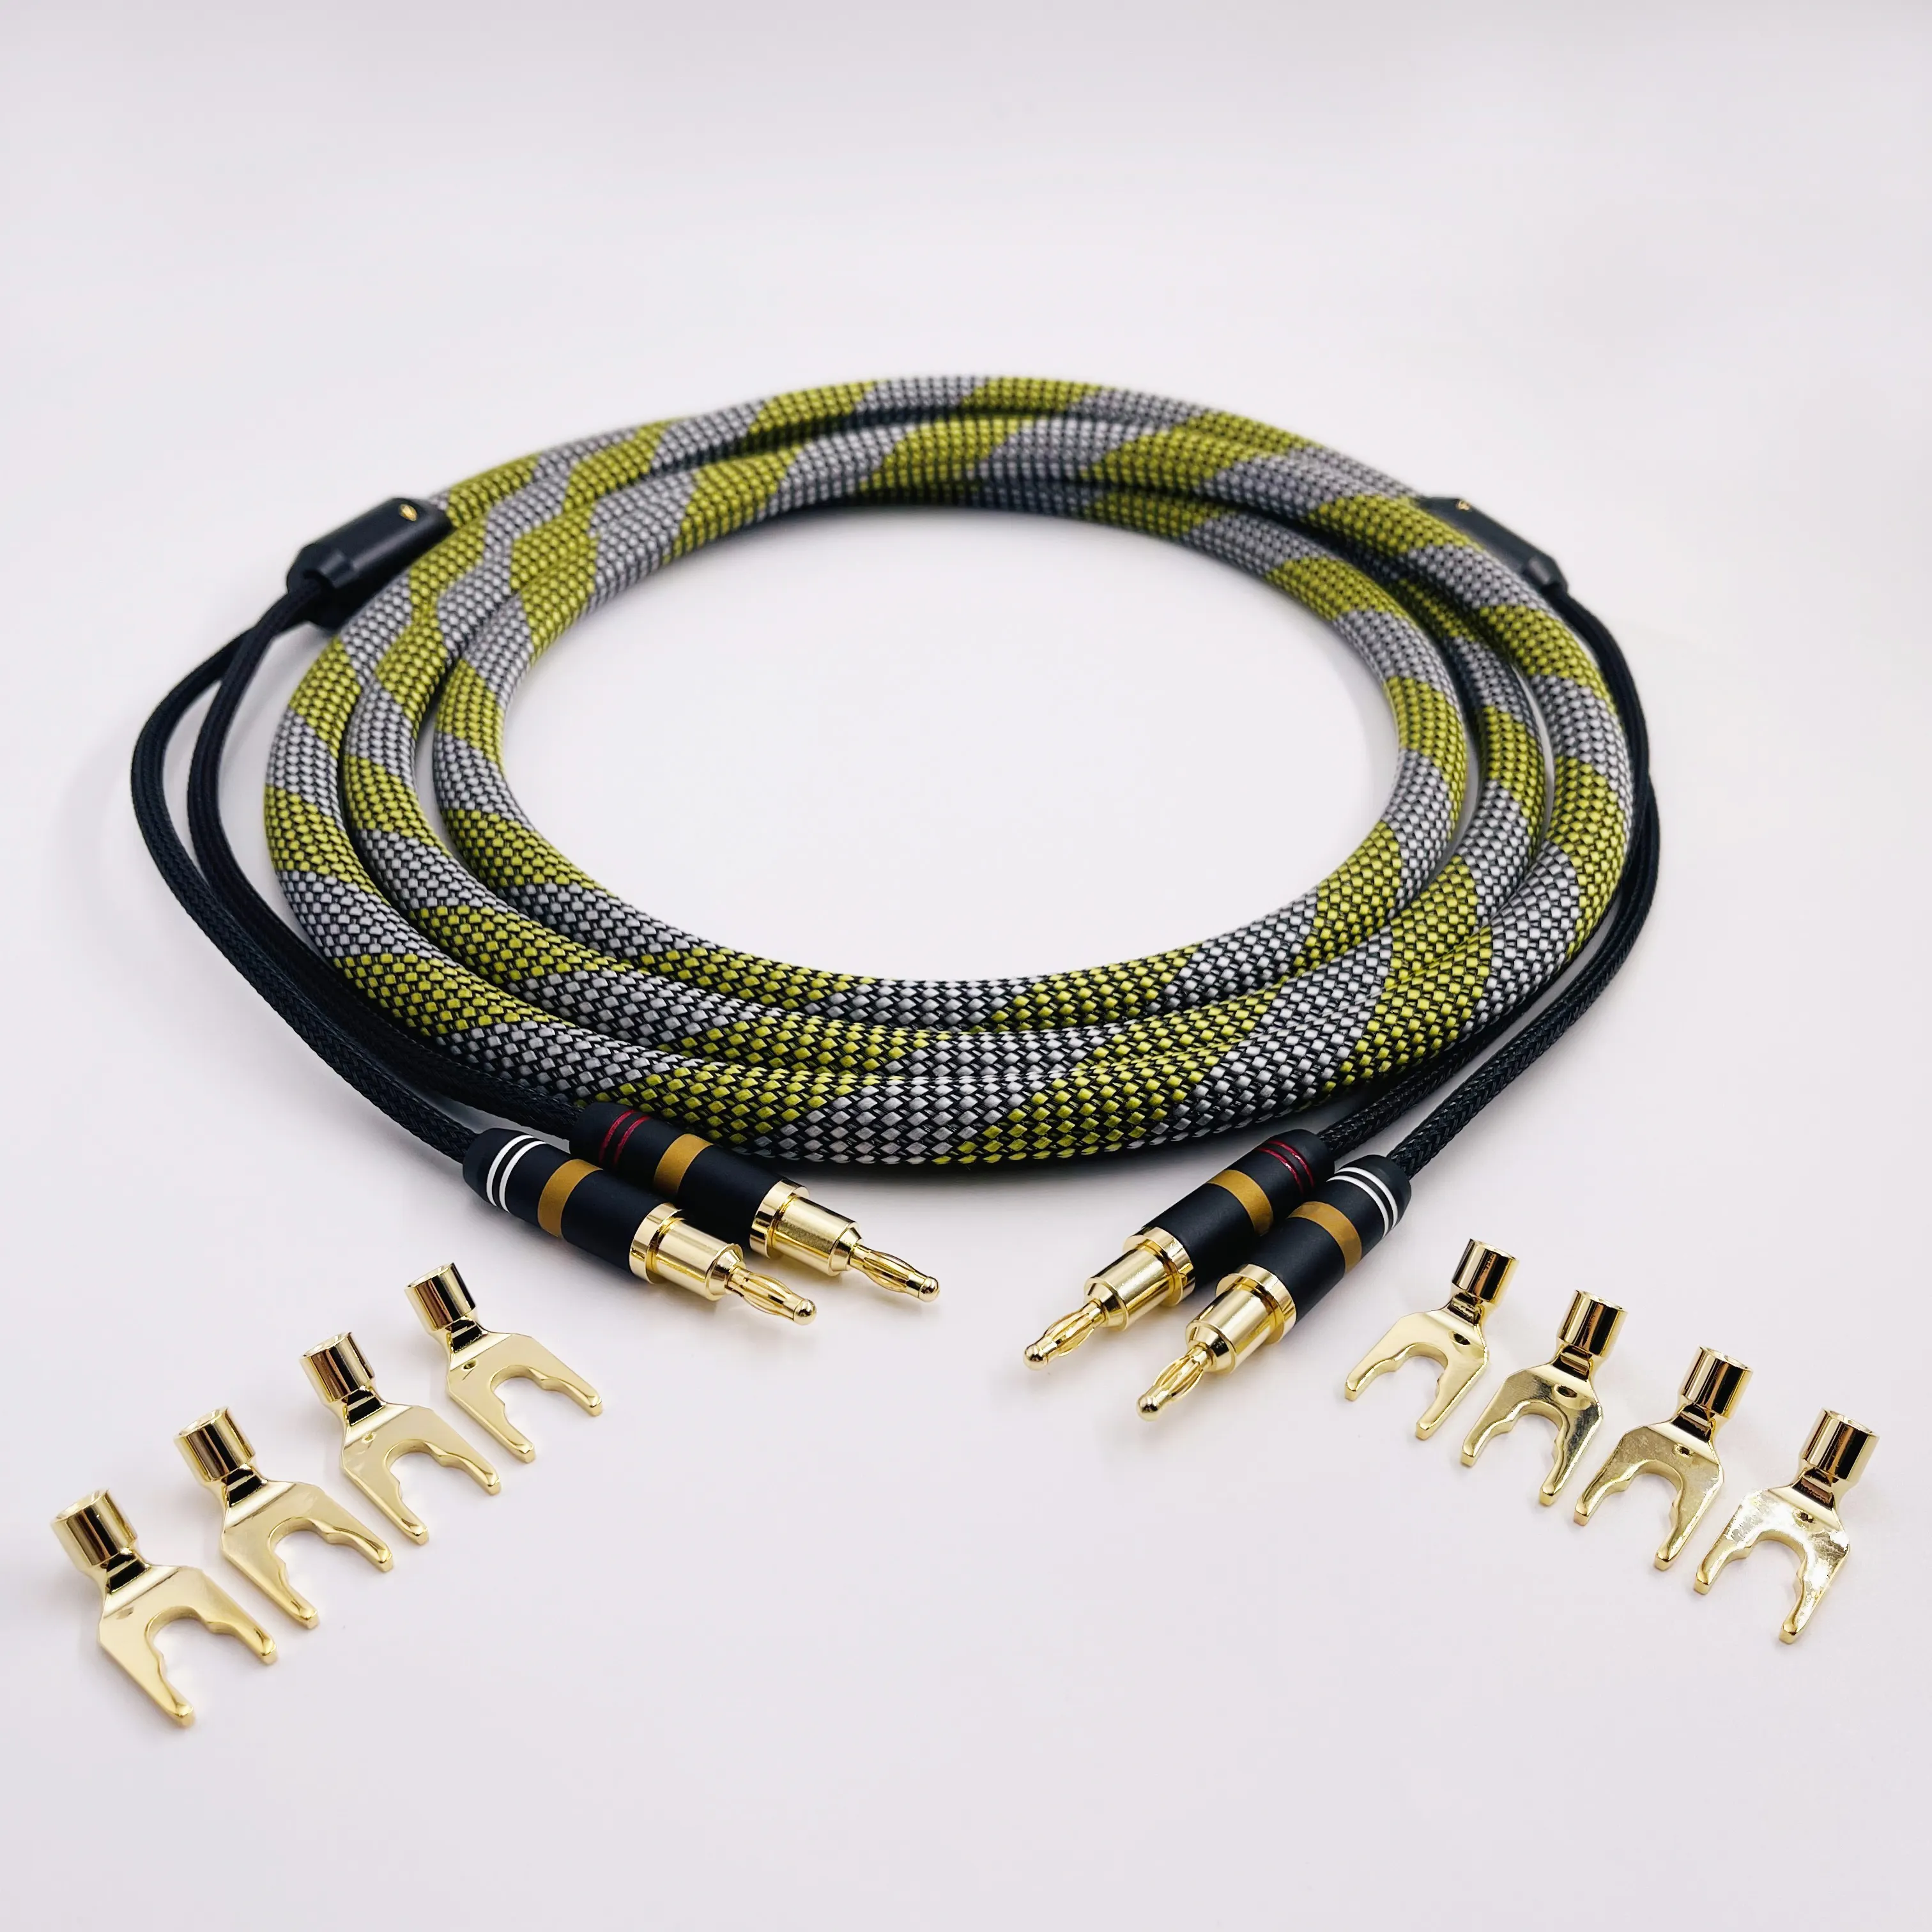 HIFI Banana Speaker Cable Audio Cable High End Amplifier Copper Jack gold plated connector